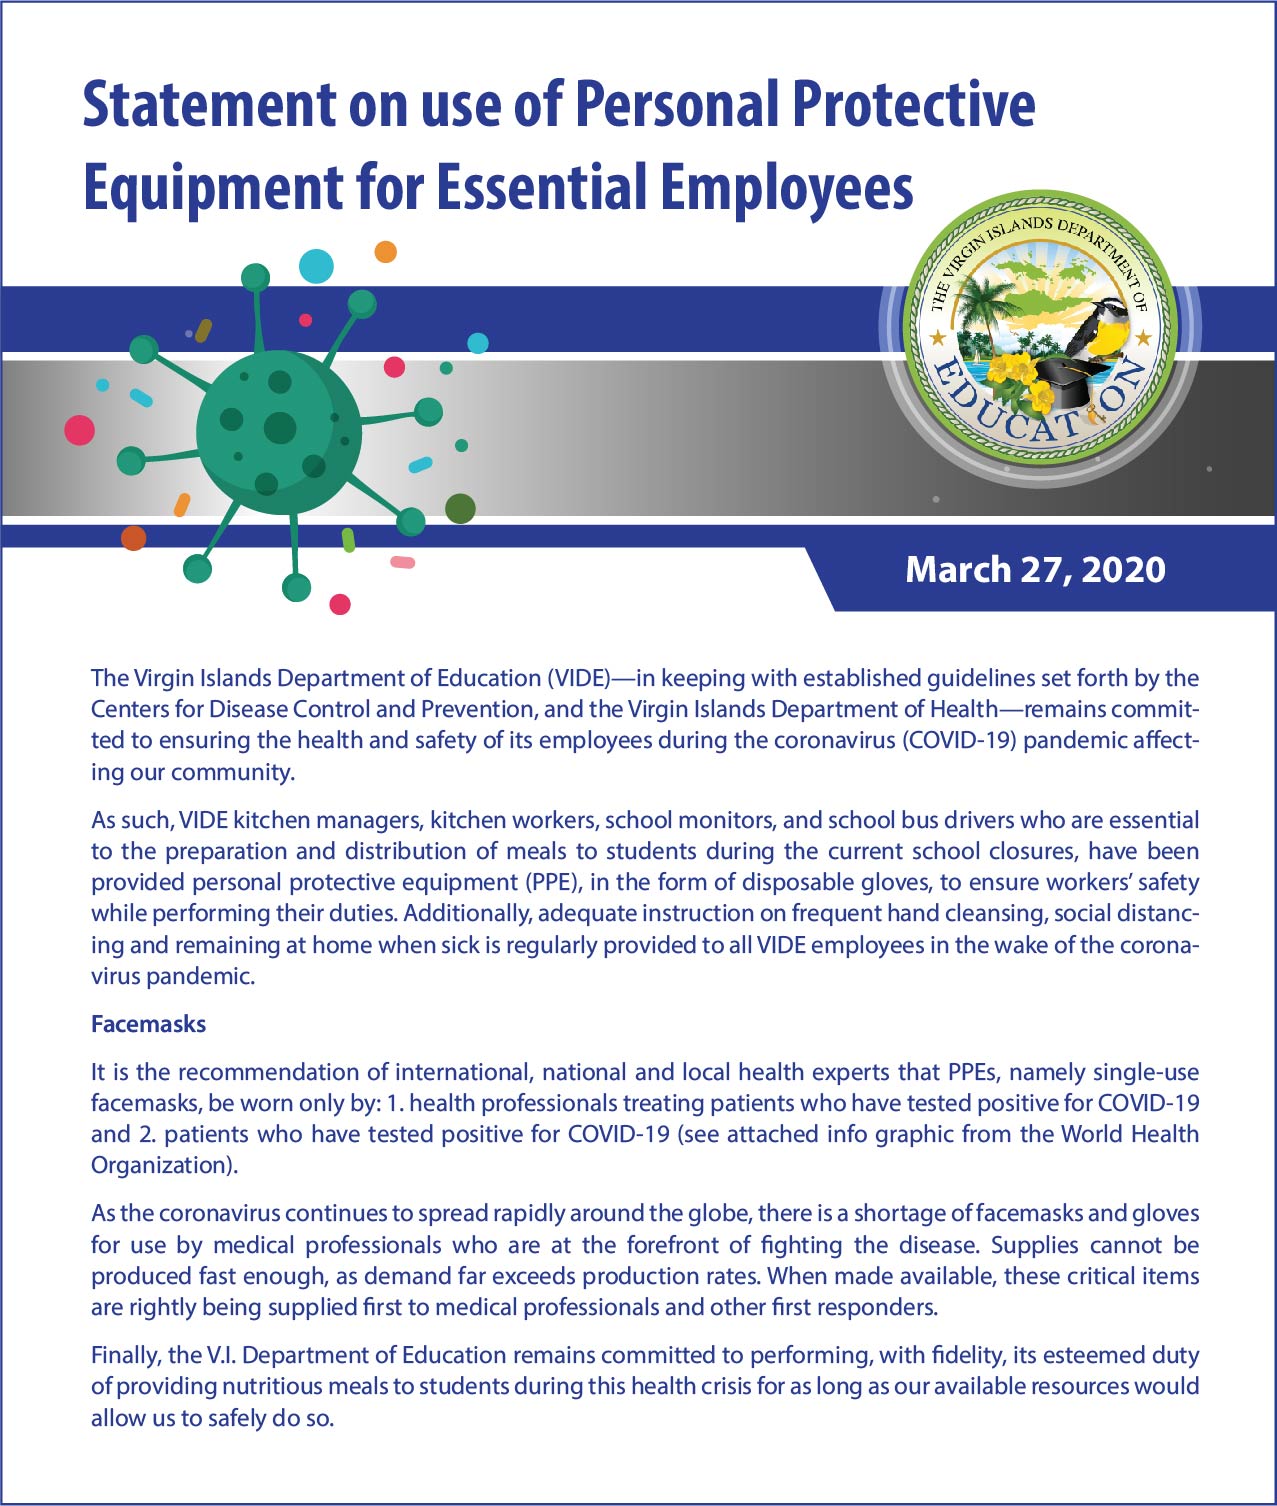 Statement on use of Personal Protective Equipment for Essential Employees.jpg